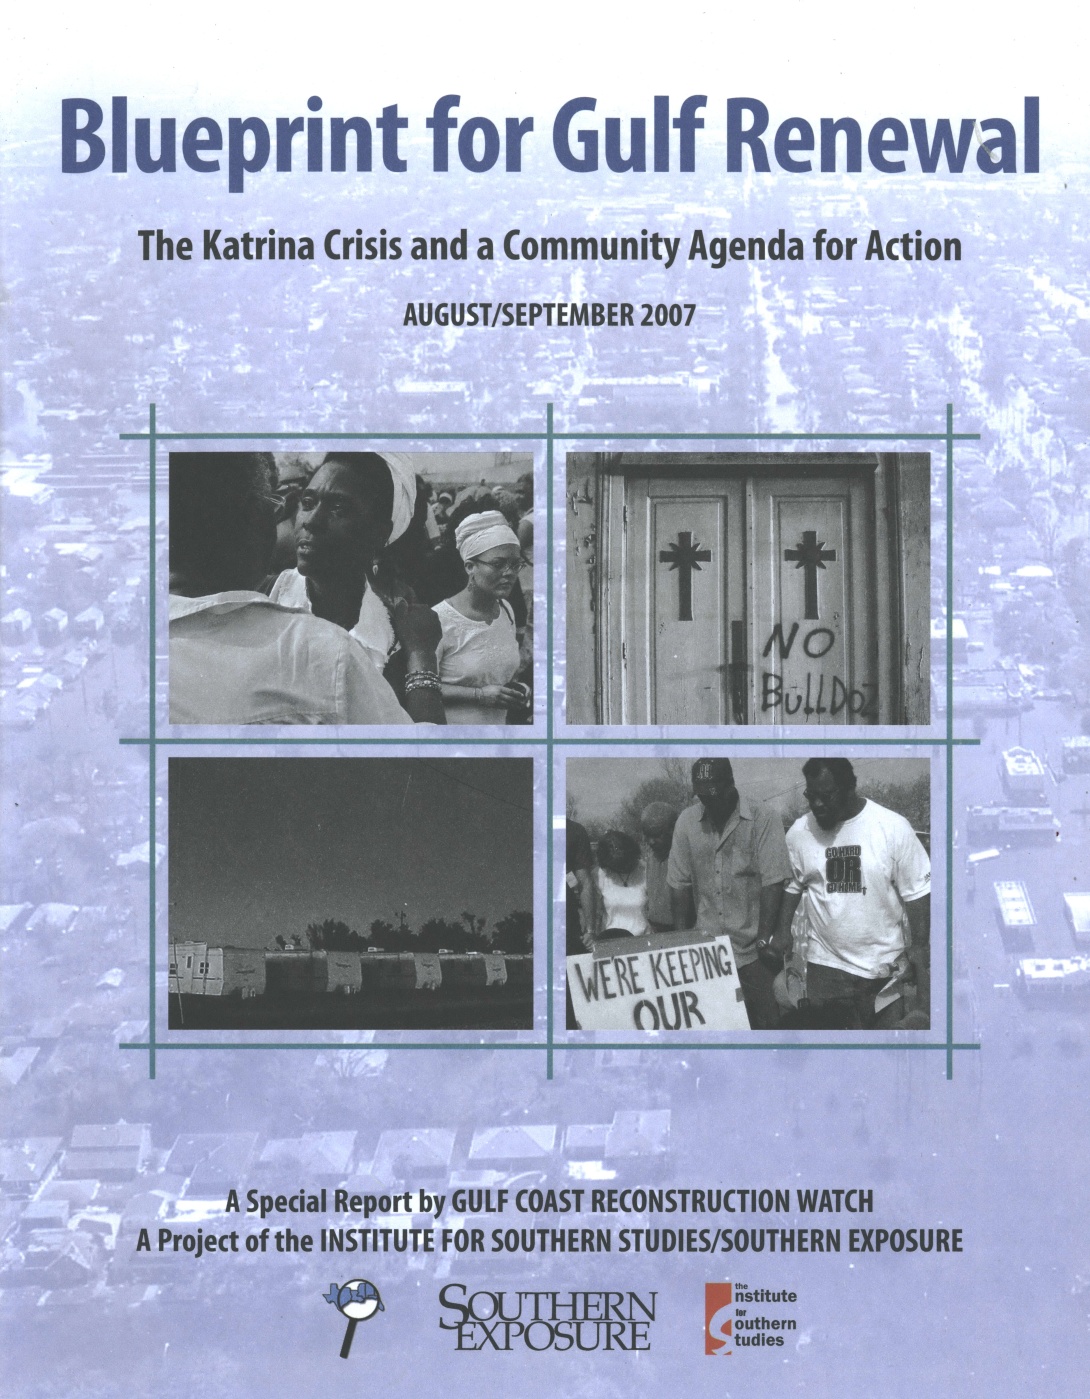 Report cover reading "Blueprint for Gulf Renewal: The Katrina Crisis and a Community Agenda for Action"